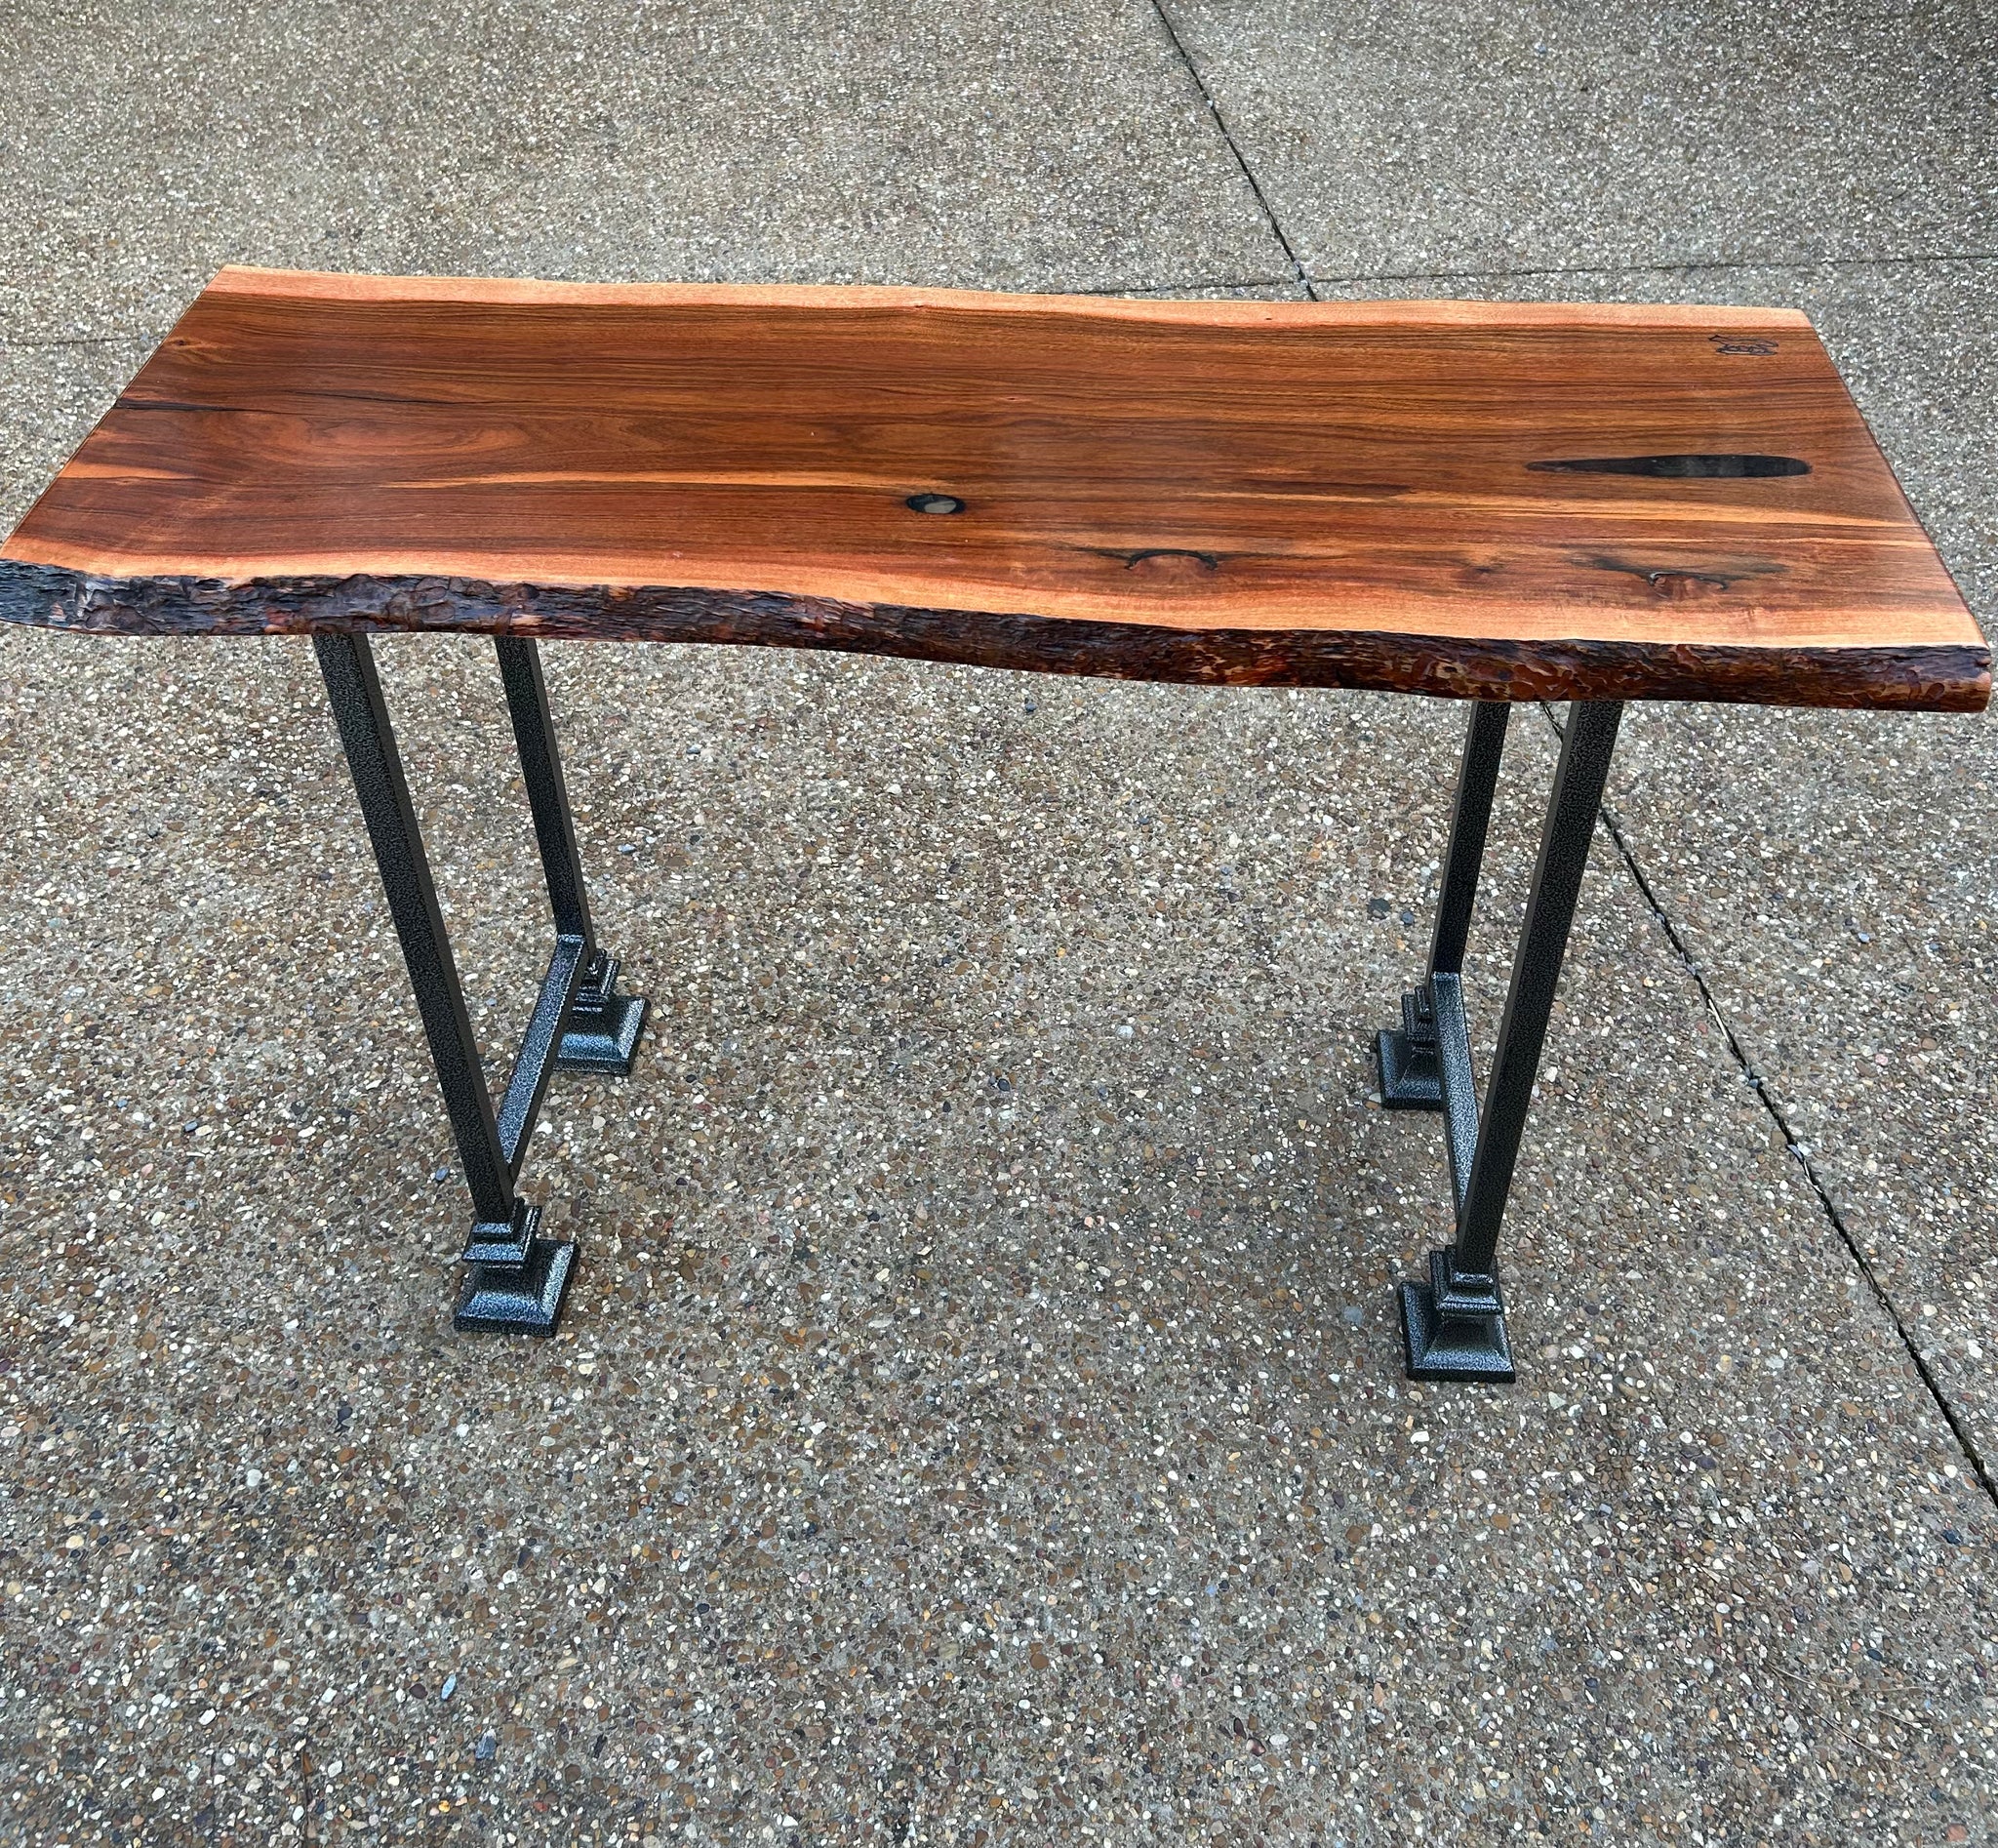 Live Edge Patagonian Rosewood Table w/bell feet legs